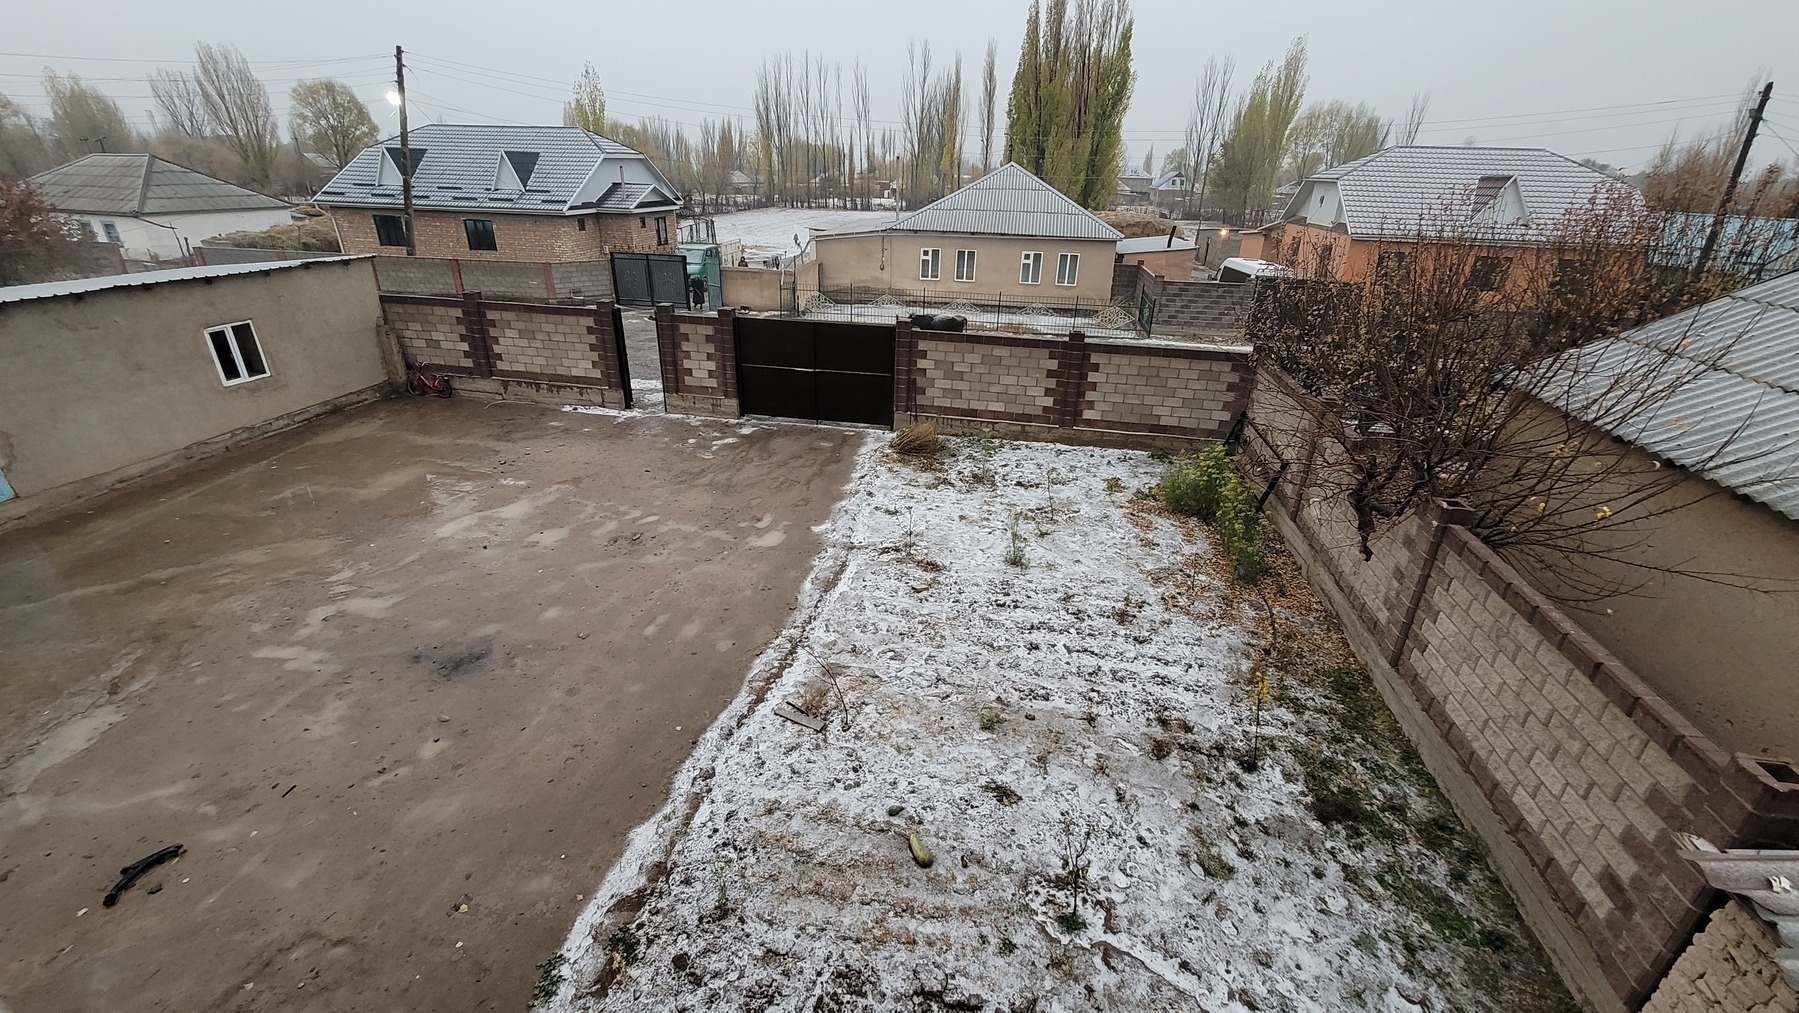 looking down at the yard and street from a second floor window, snow on the grassy parts of the ground